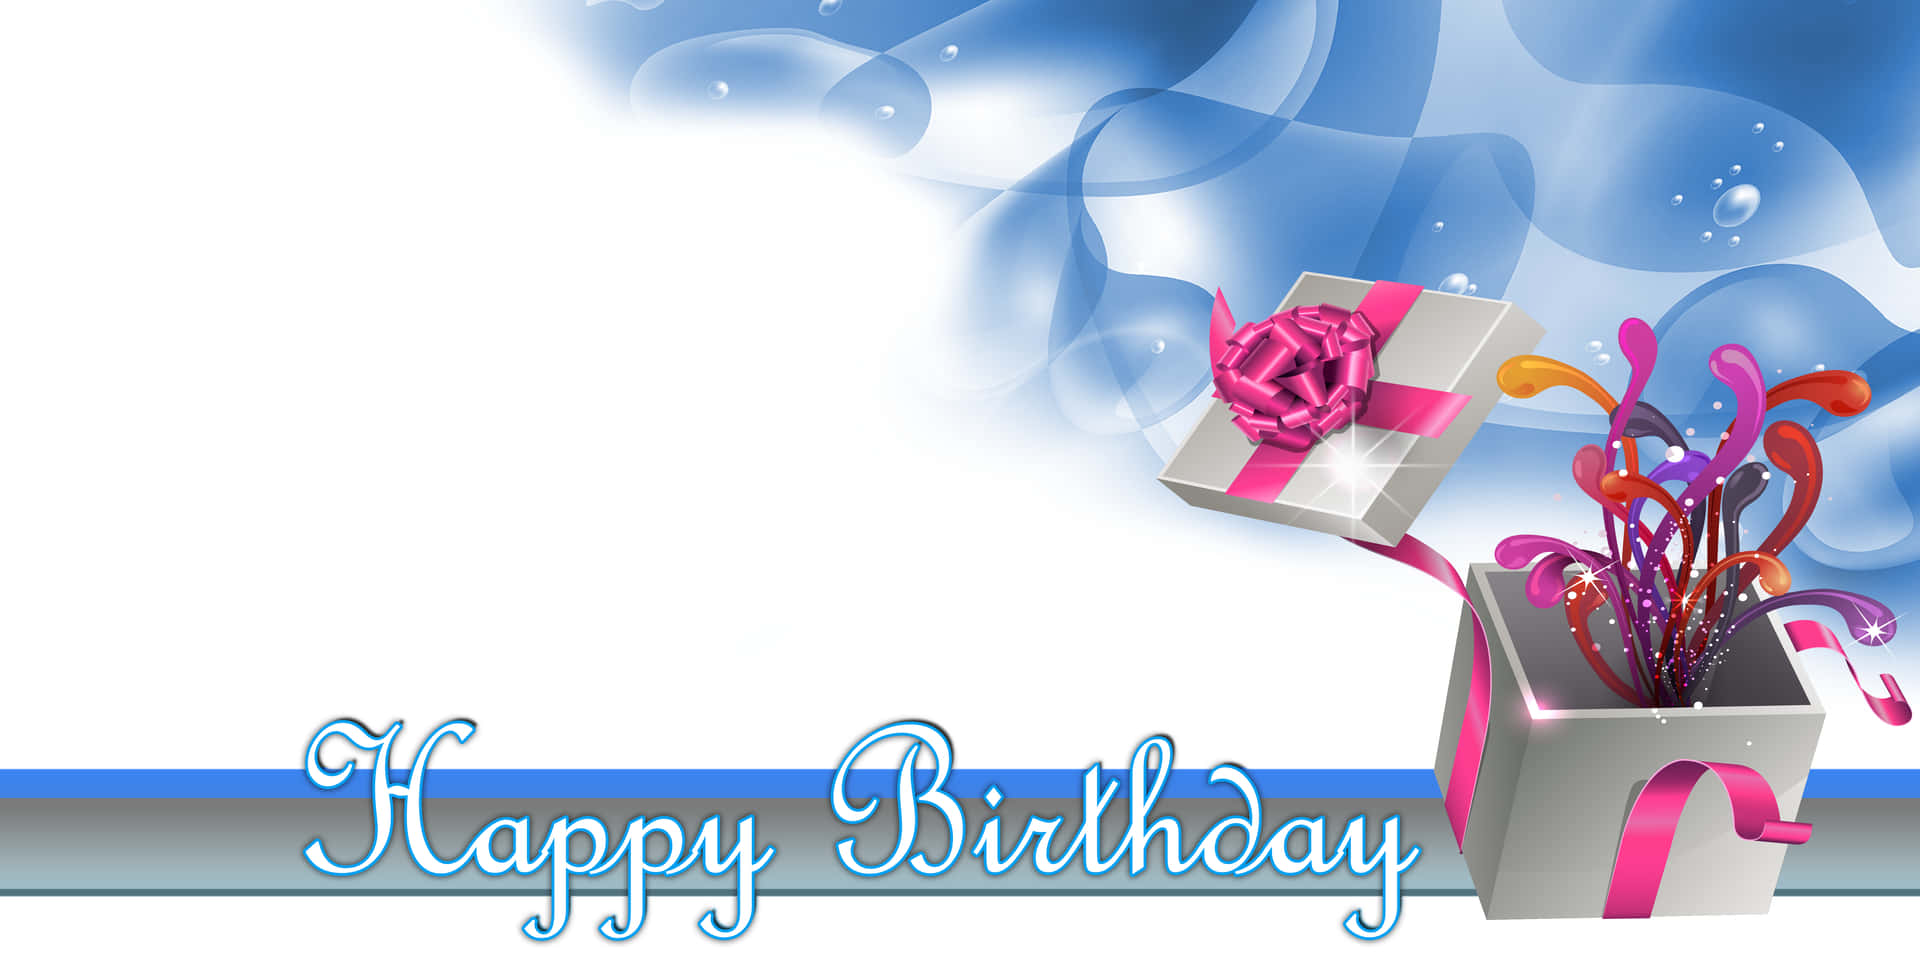 Birthday Banner Pictures 6912 X 3456 Picture